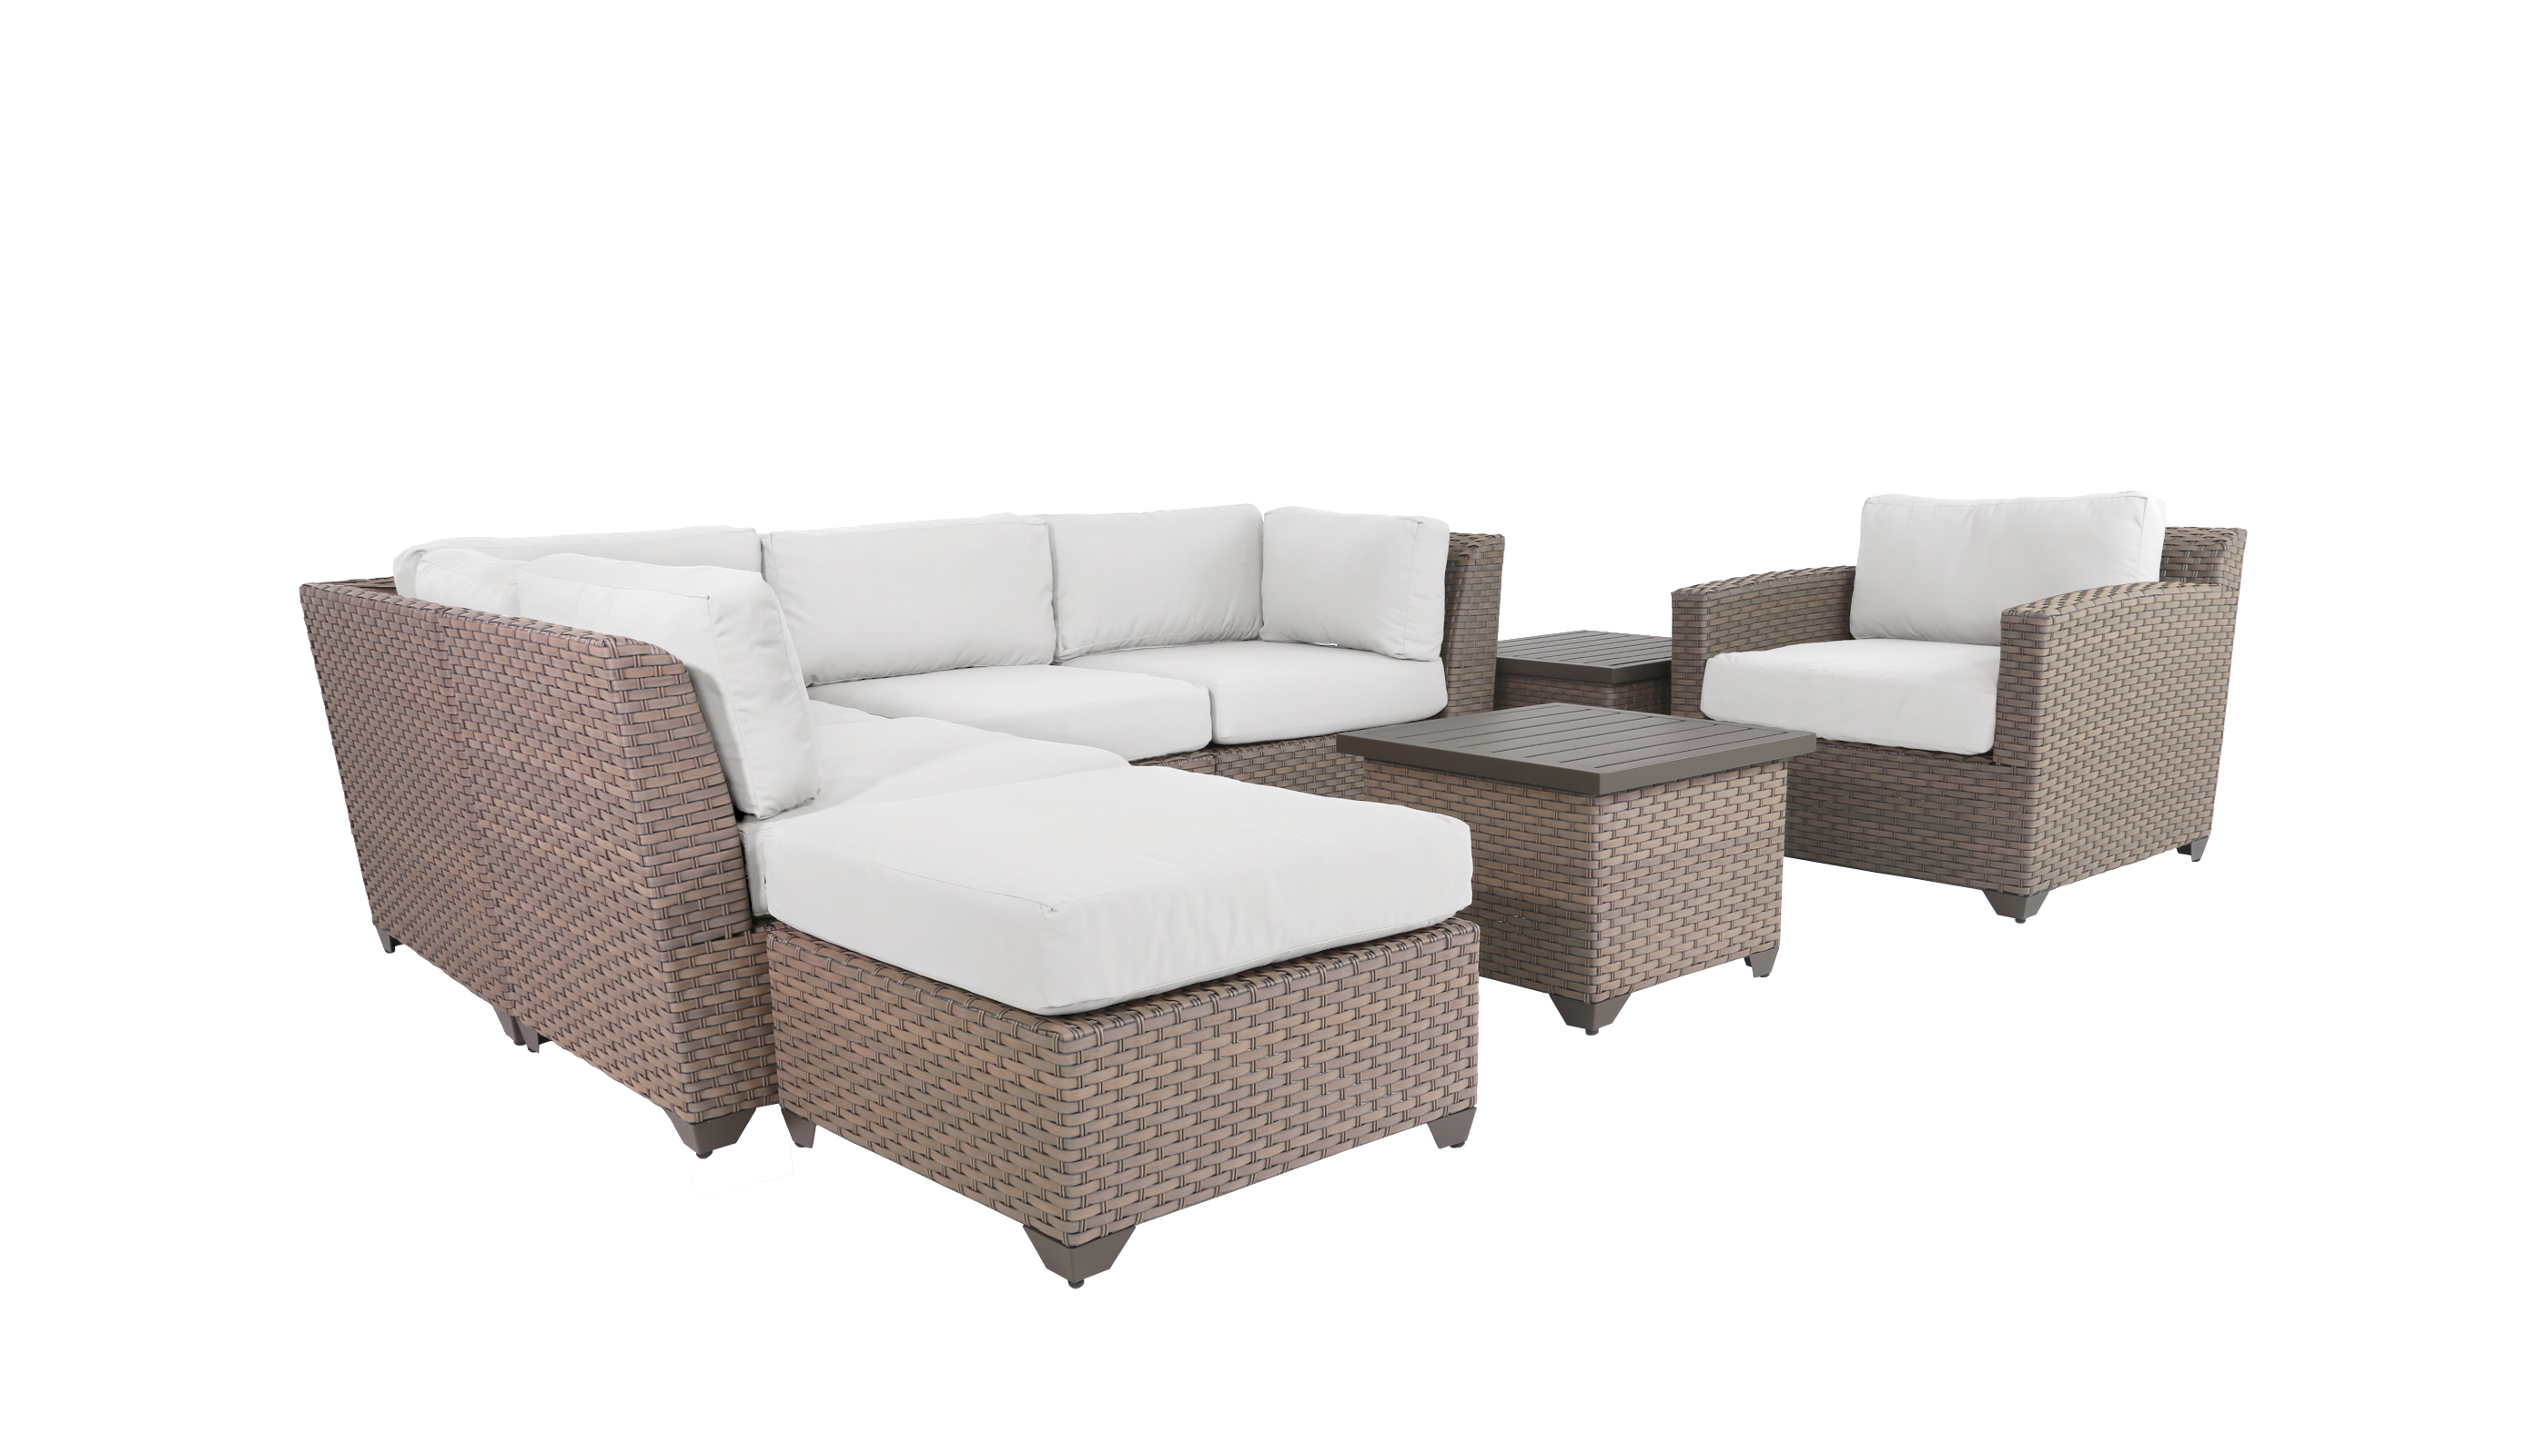 TK Classics Florence Wicker 8 Piece Patio Conversation Set with End Table and 2 Sets of Cushion Covers - image 3 of 12